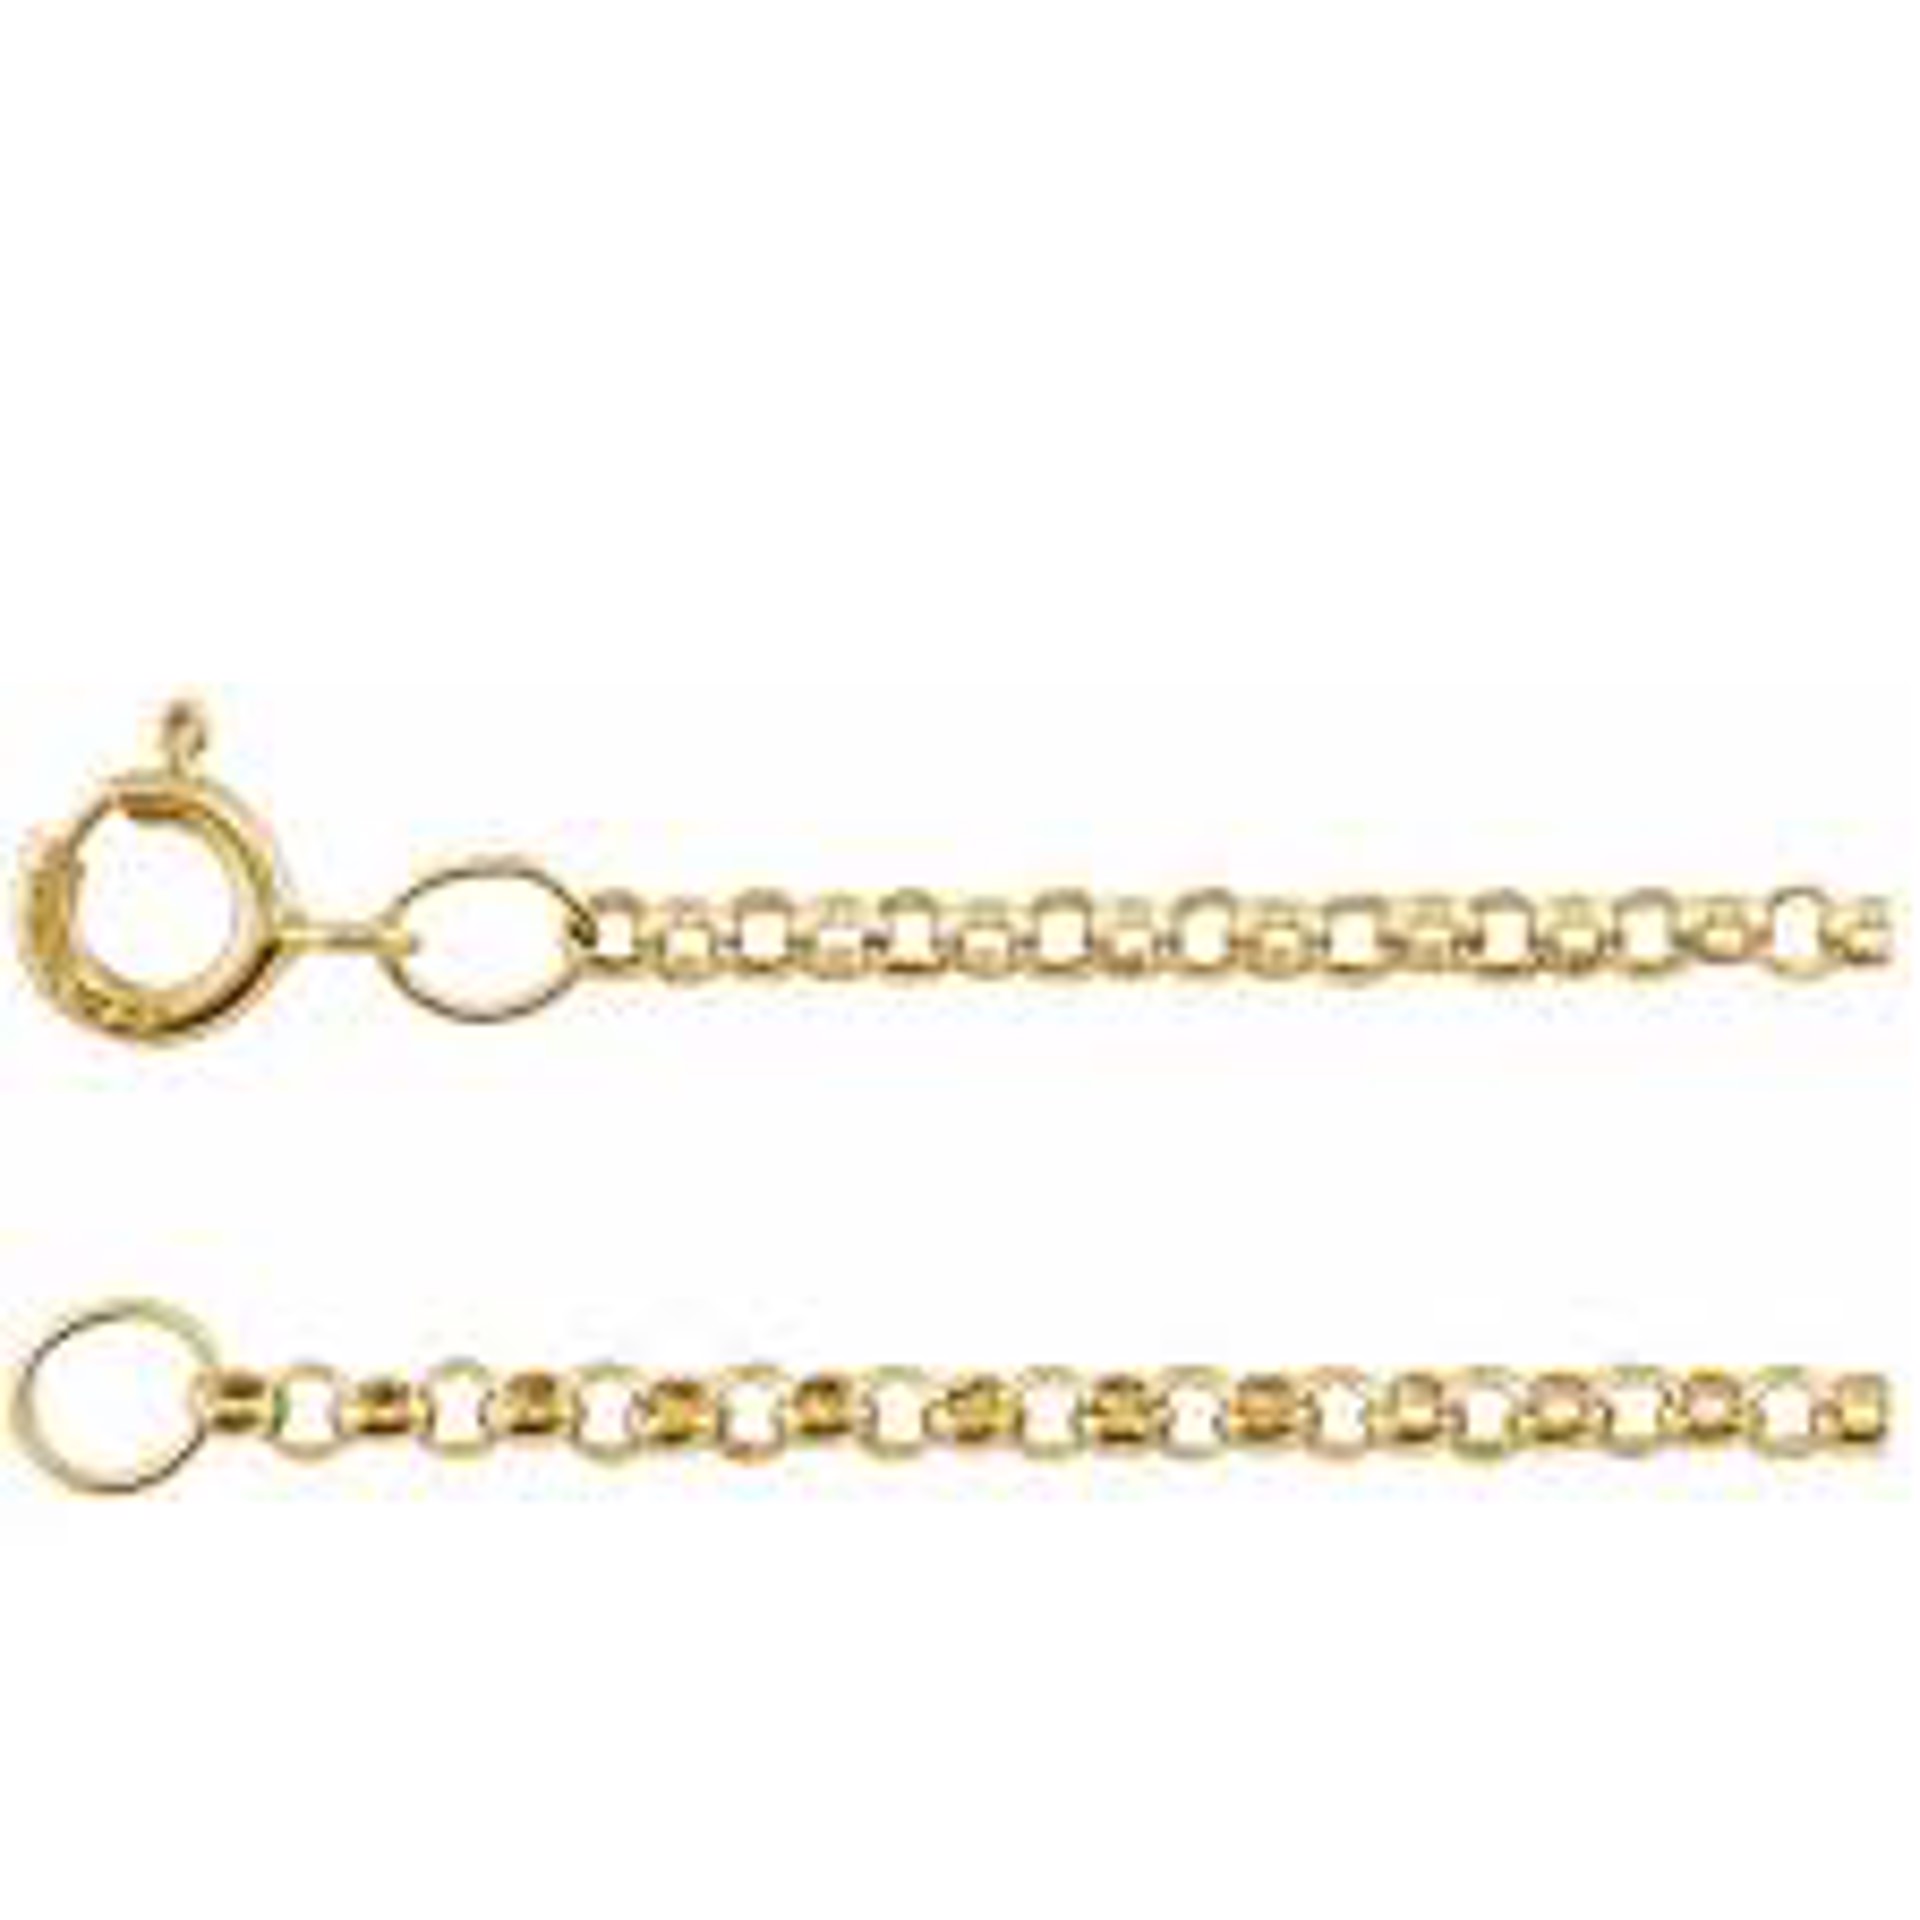 Trace Diamond Cut Cable Chain 17-18" Adjustable 18k Yellow Gold by Kristen Baird